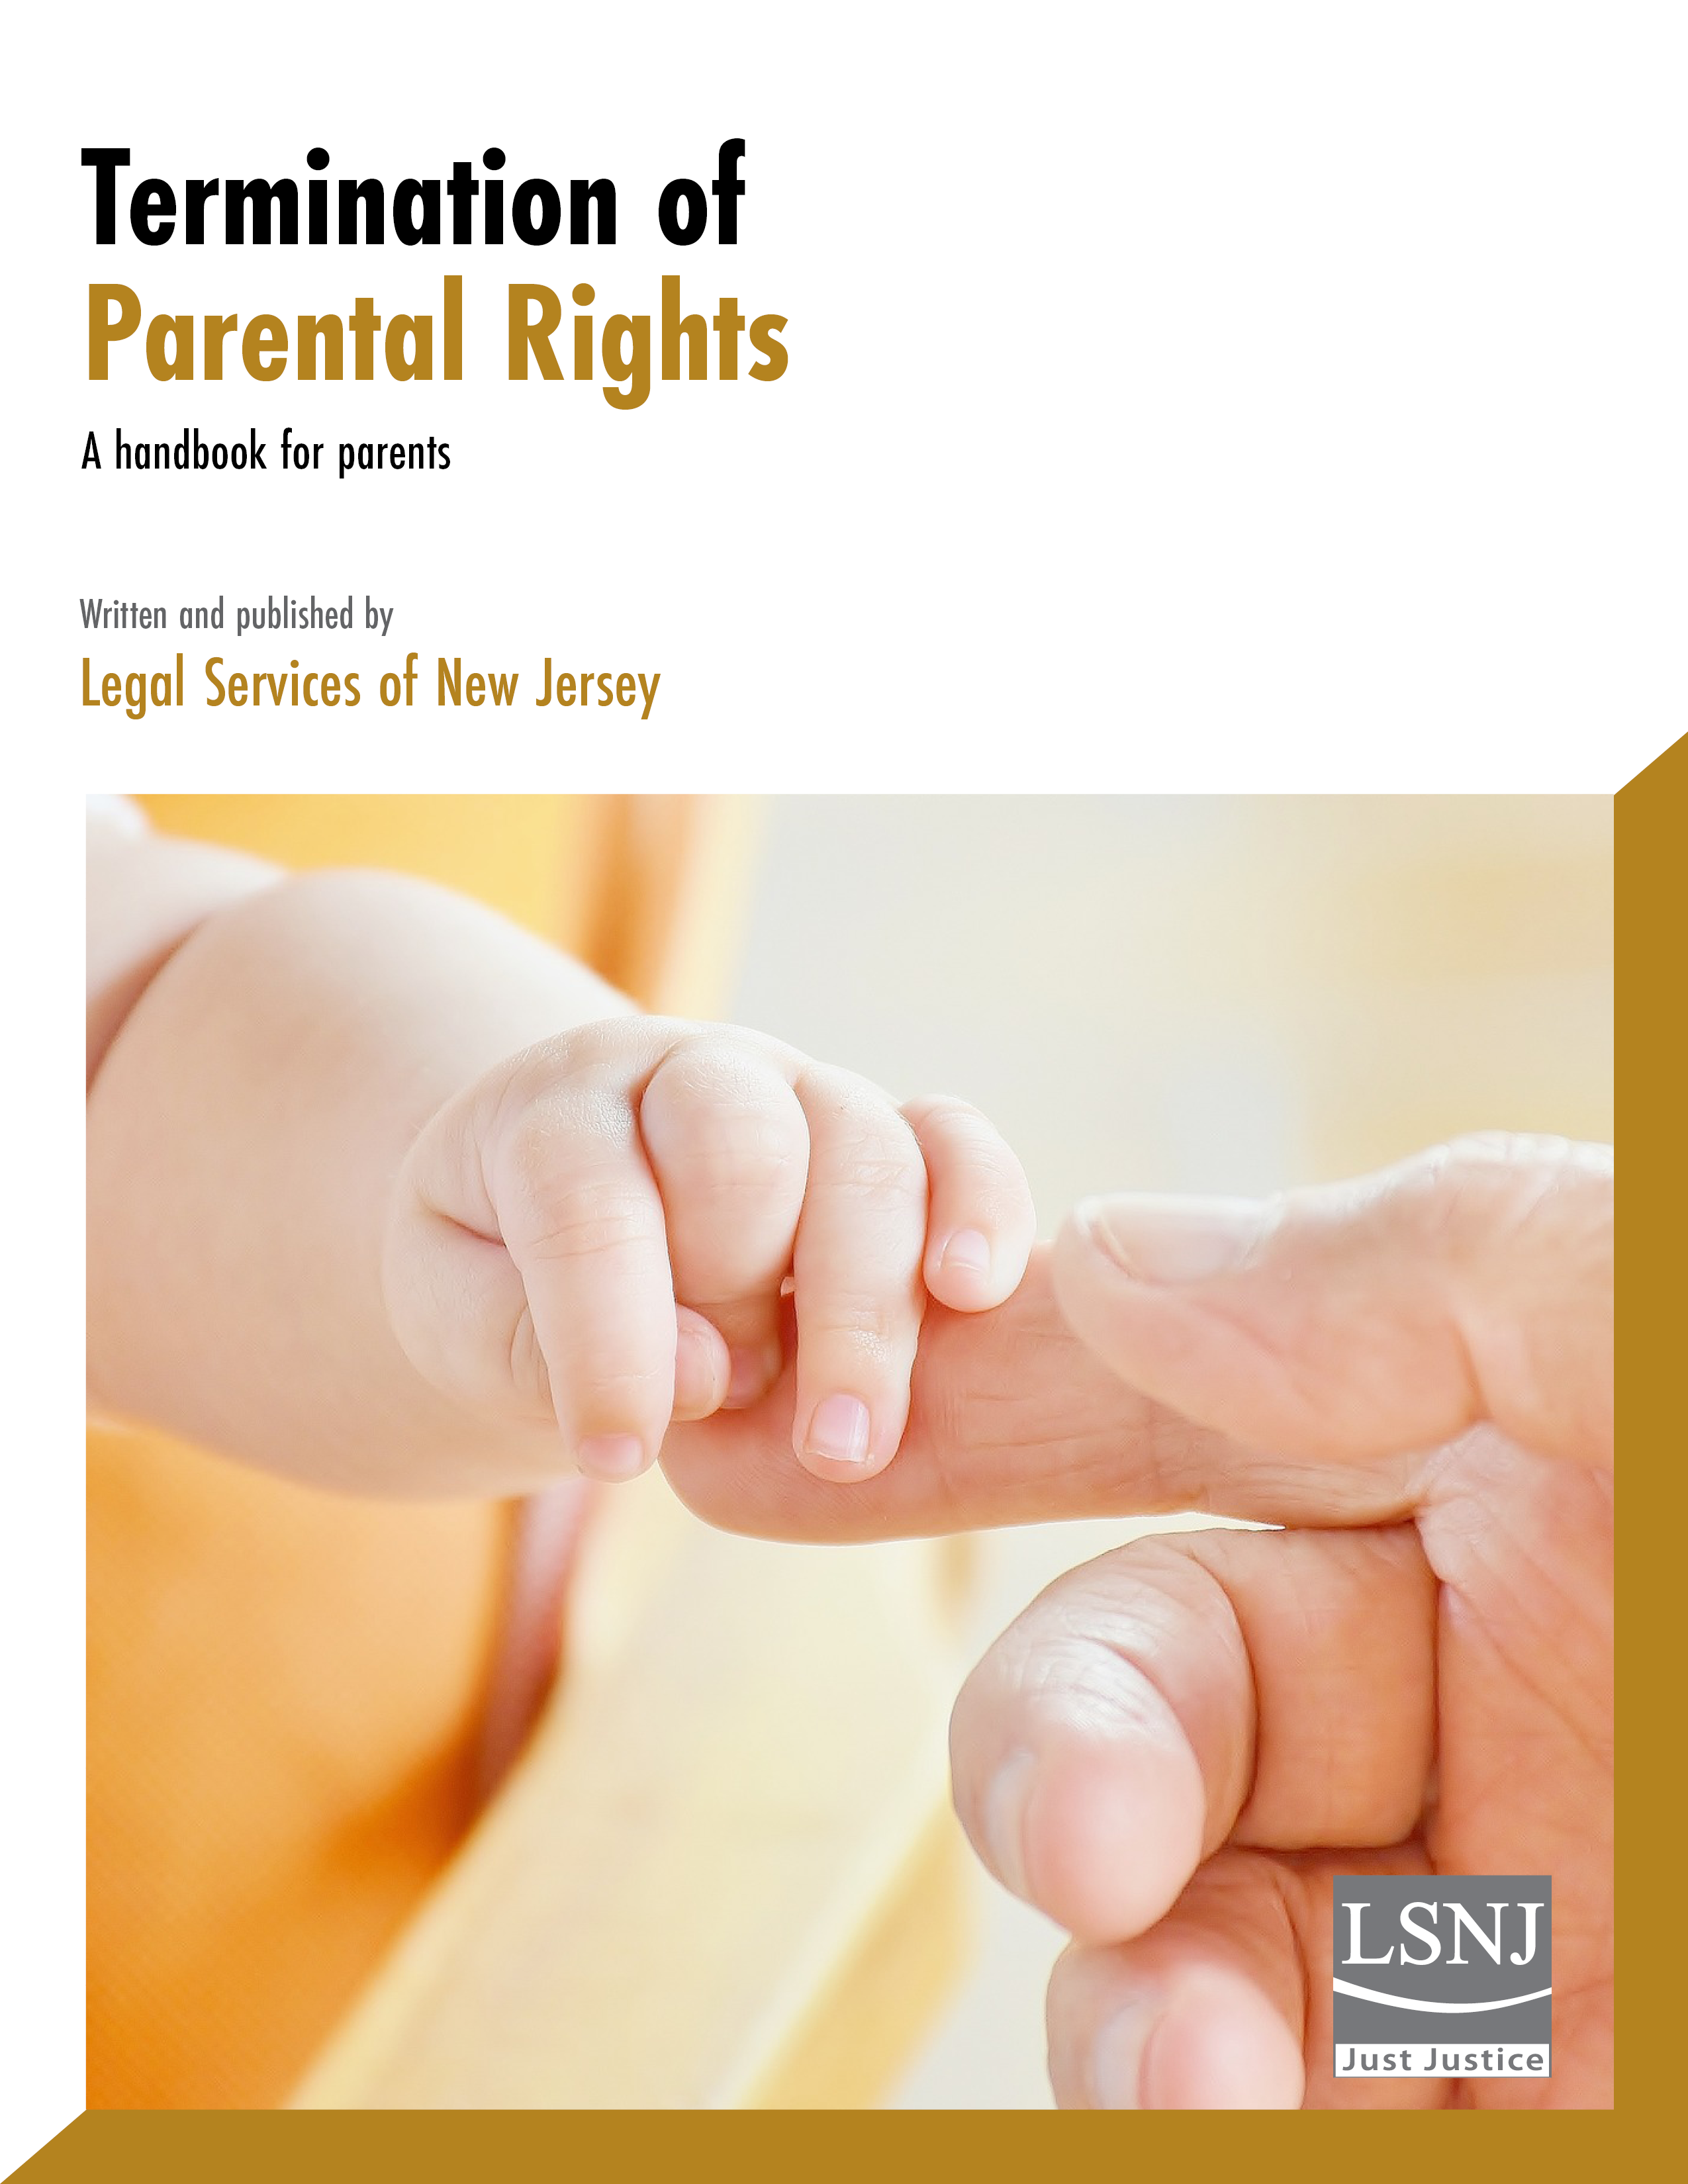 Termination of Parental Rights: A Handbook for Parents